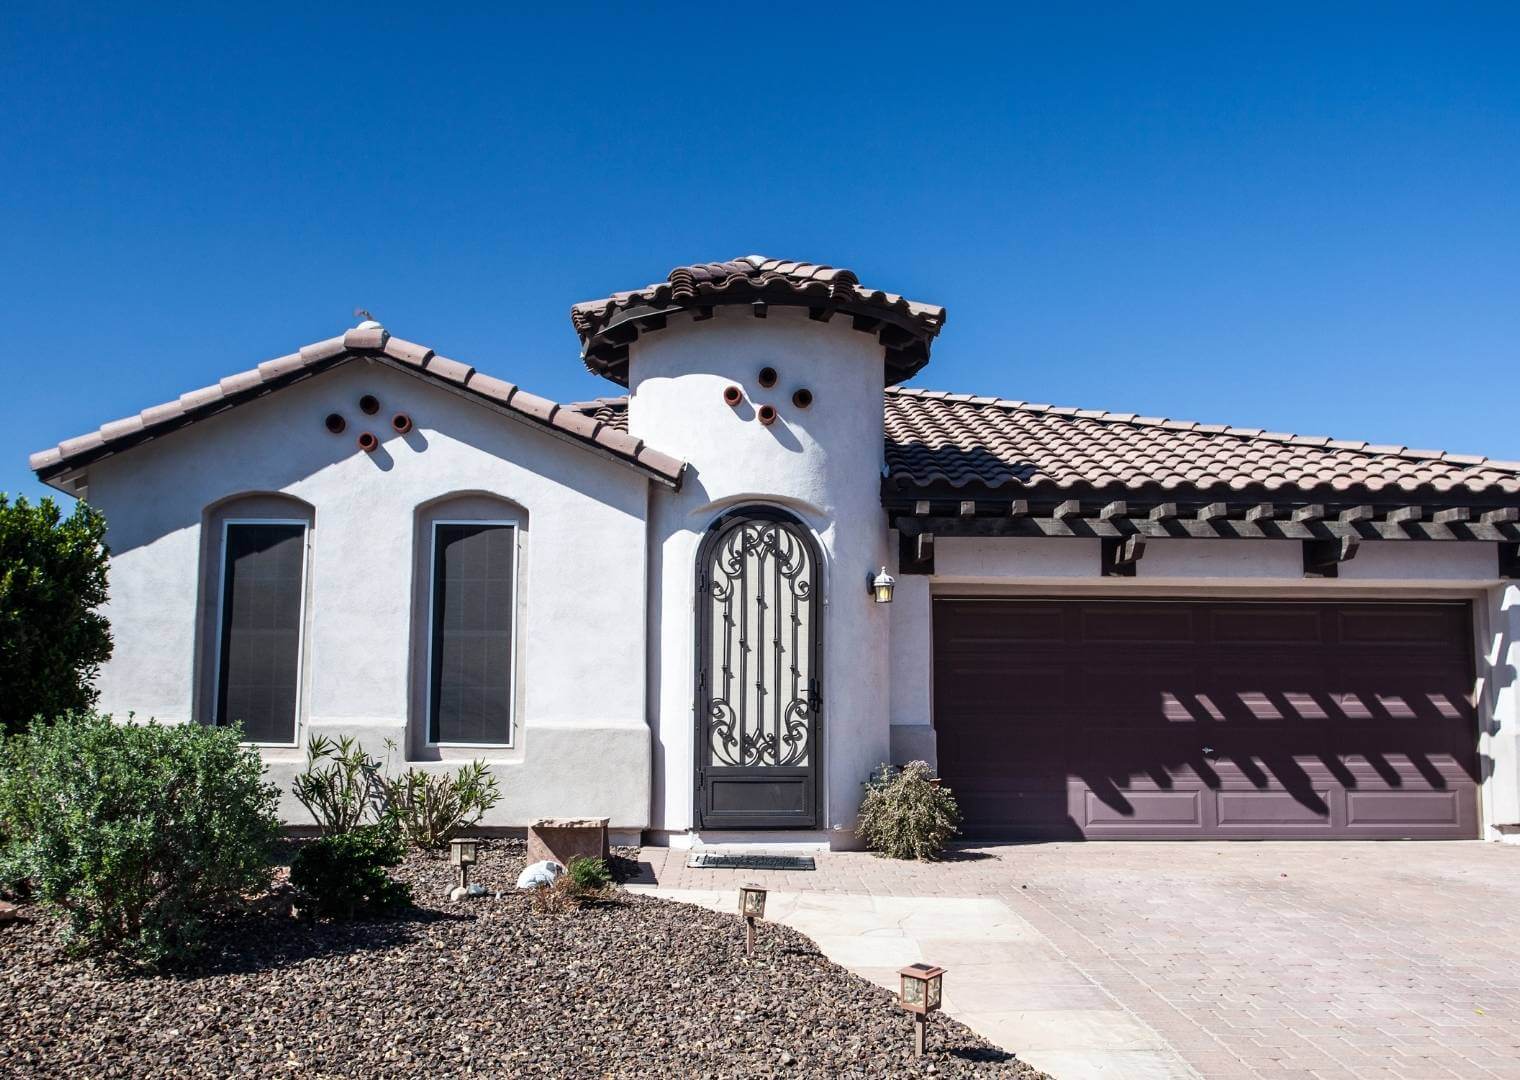 Elements from Spanish architecture are seen in most new homes around the Valley. The exteriors often include stucco walls, tiled roofs and arched windows, while the interiors typically have modern Ranch style layouts.